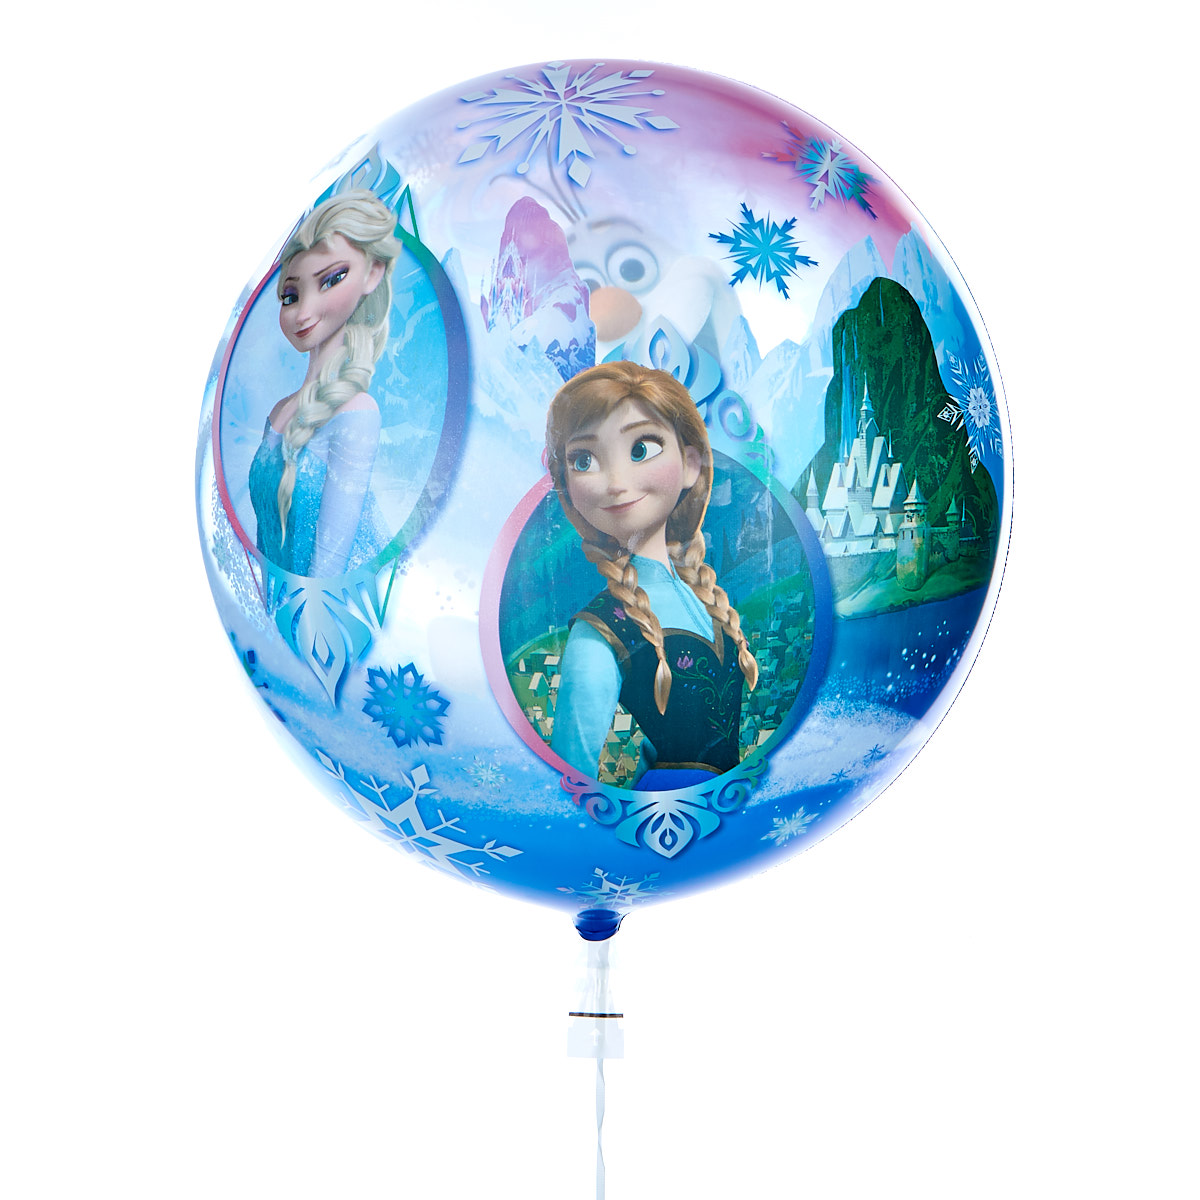 22 Inch Bubble Balloon - Disney's Frozen - DELIVERED INFLATED!